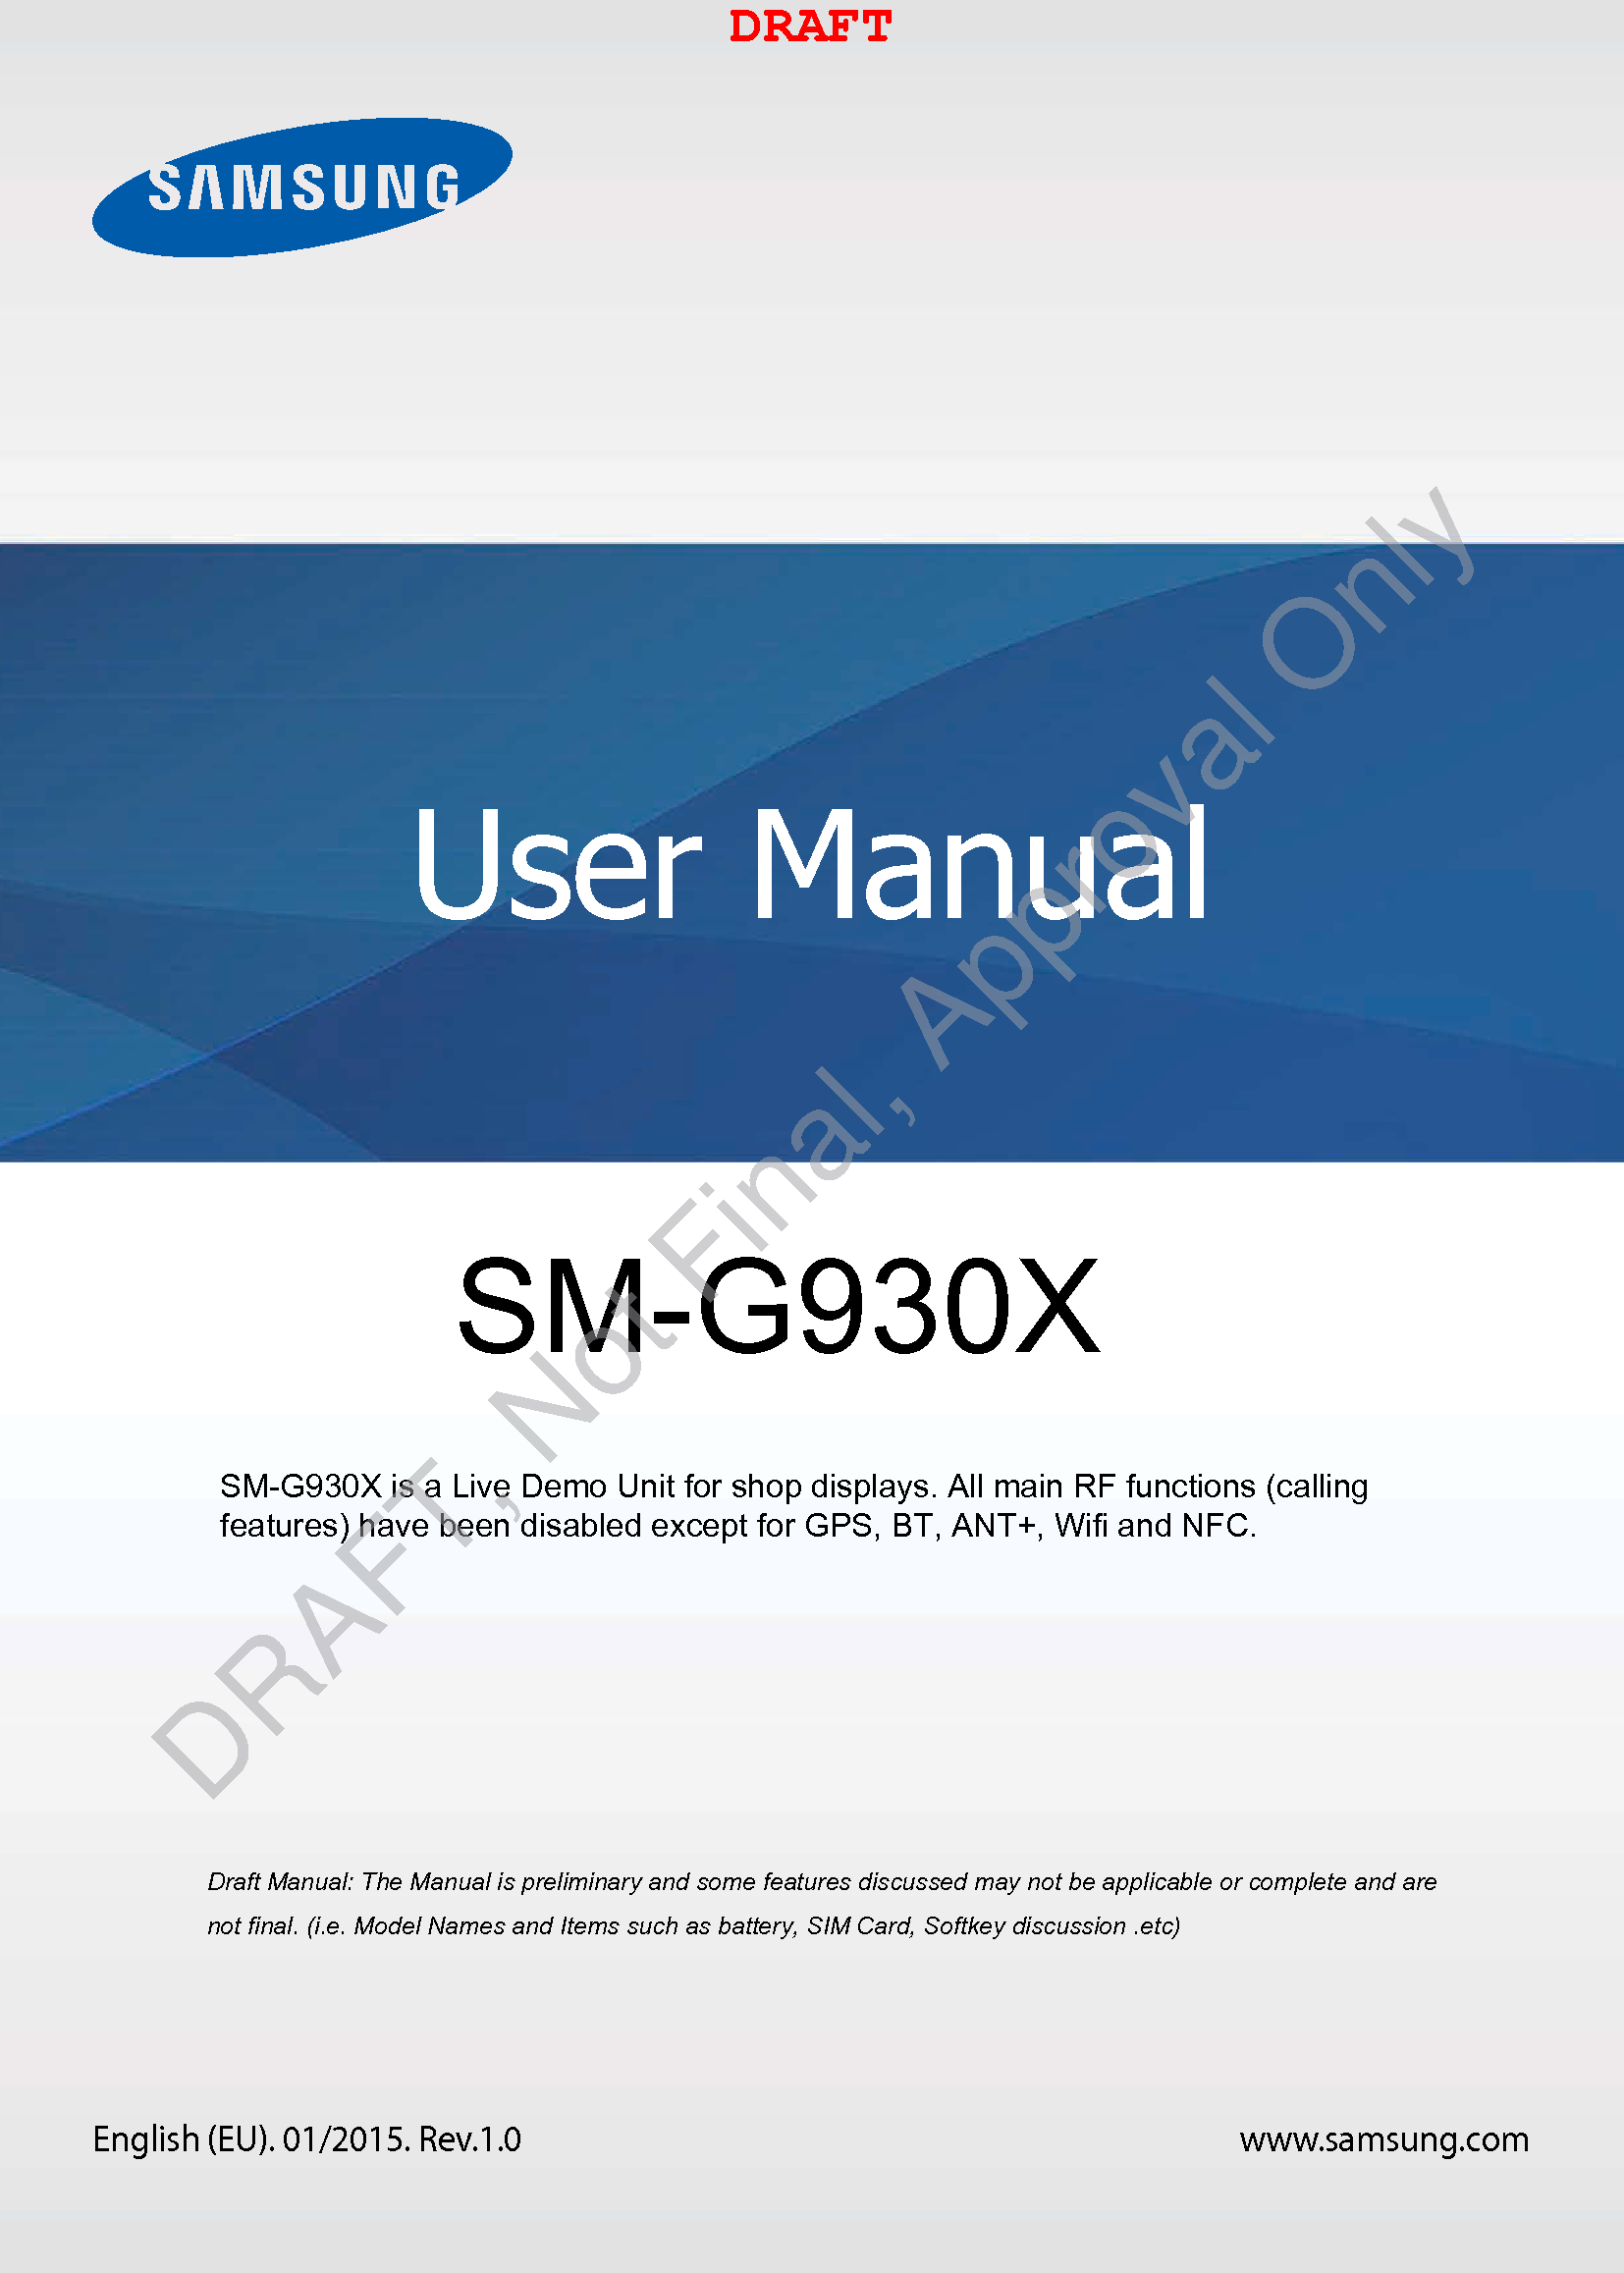 www.samsung.comUser ManualEnglish (EU). 01/2015. Rev.1.0a ana  ana  na and  a dd a n  aa   and a n na  d a and   a a  ad  dn SM-G930X DRAFTSM-G930X is a Live Demo Unit for shop displays. All main RF functions (calling features) have been disabled except for GPS, BT, ANT+, Wifi and NFC.DRAFT, Not Final, Approval Only